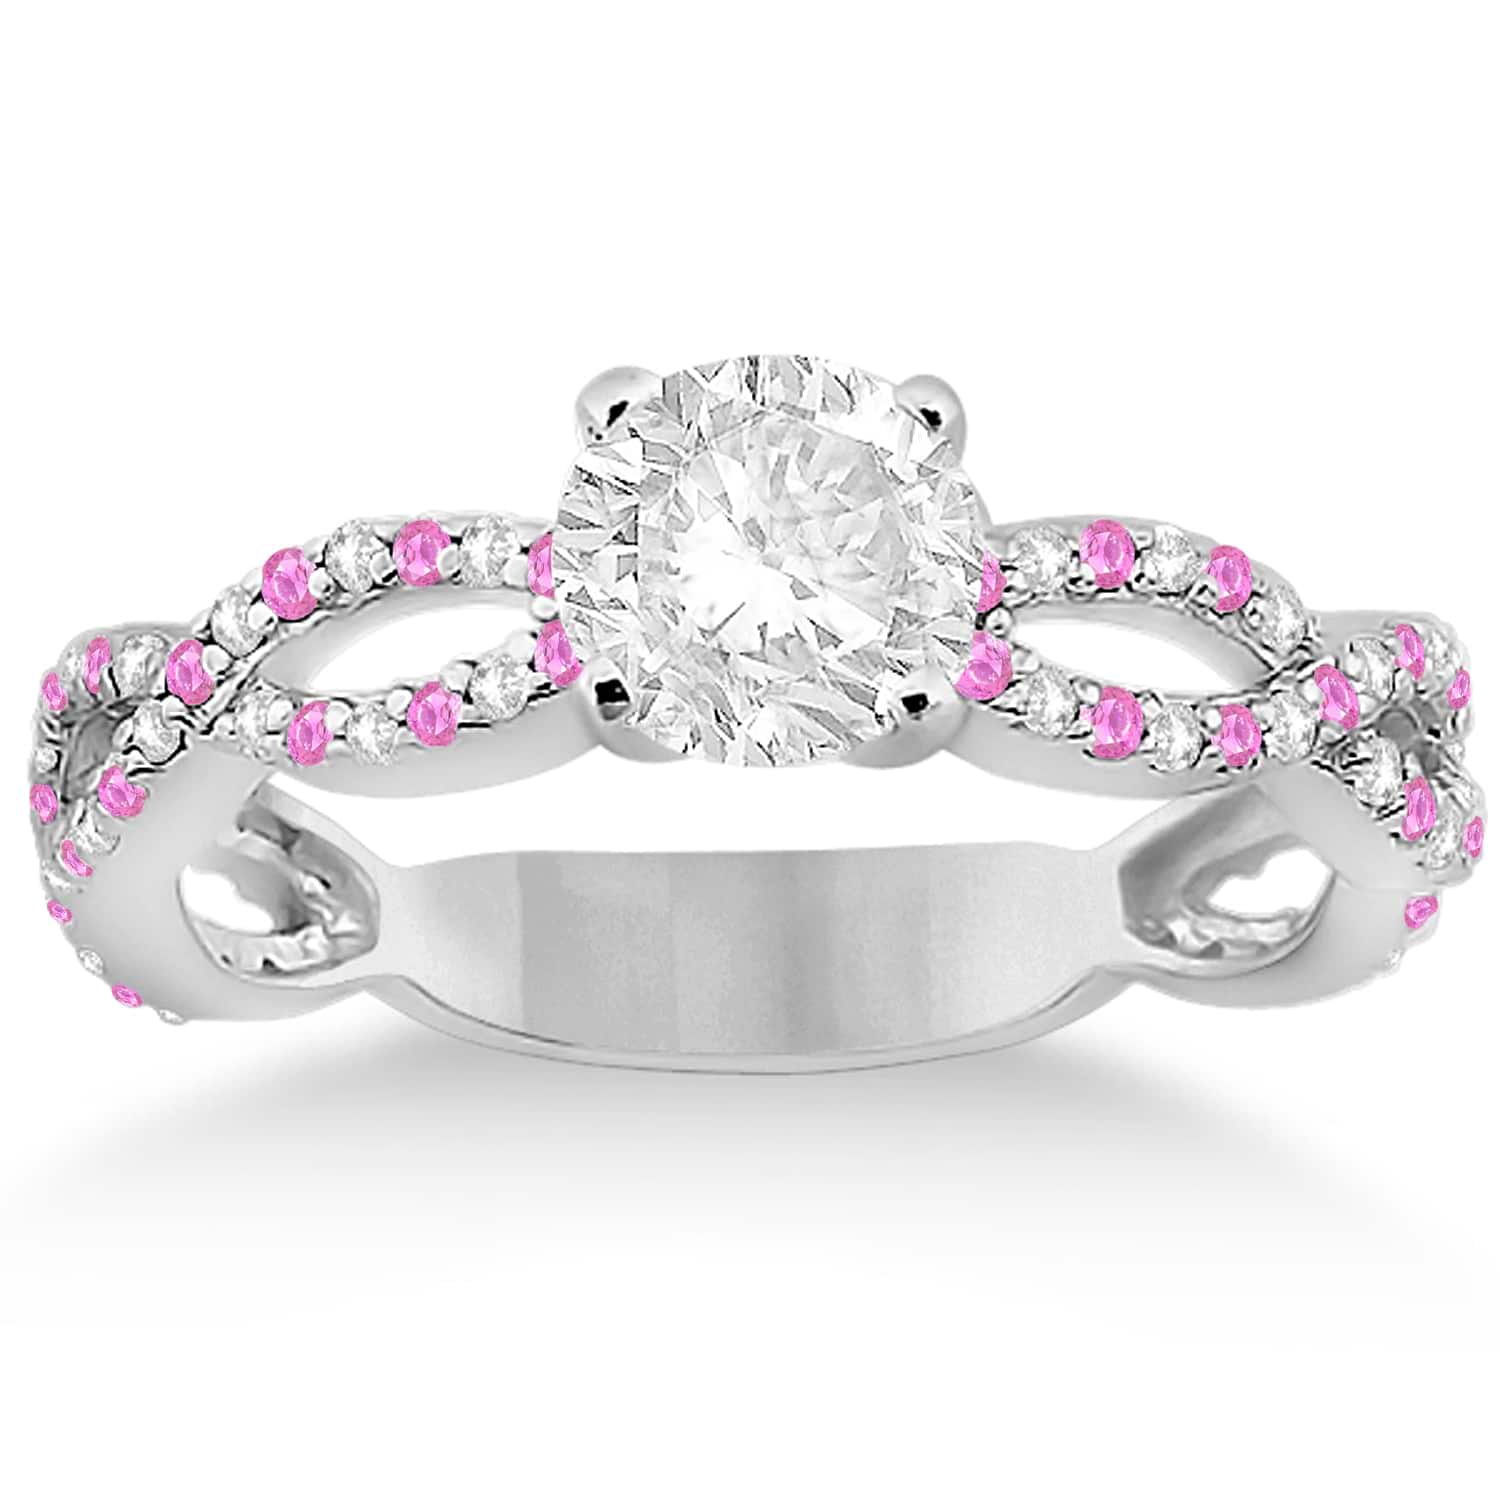 Infinity Diamond & Pink Sapphire Engagement Ring with Band 18k White Gold (0.65ct)